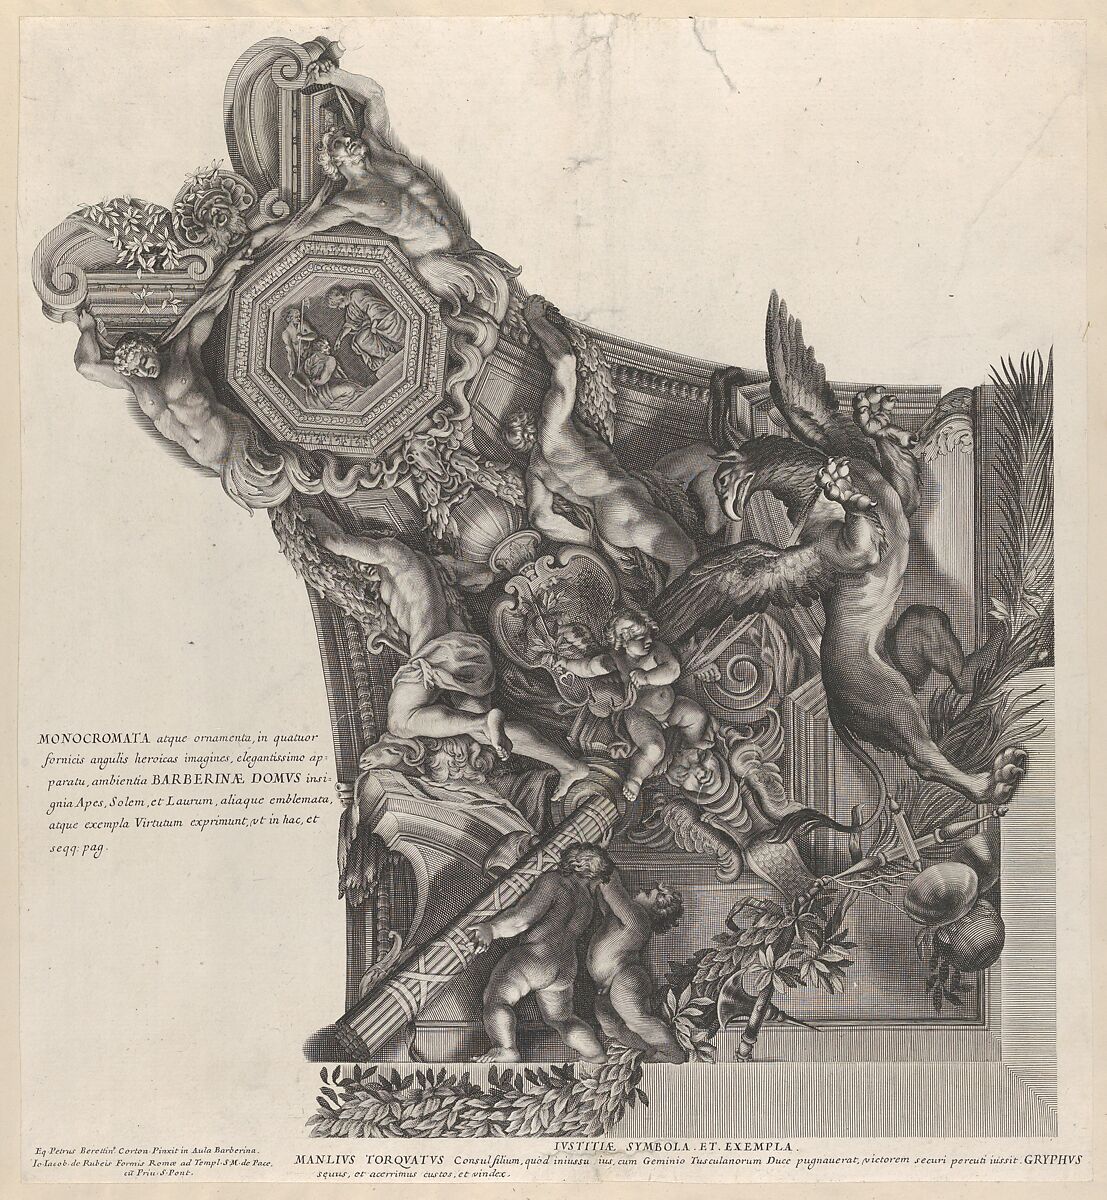 Plate 7: Allegory of Justice with griffin of Manlius Toquatus, from Barberinae aulae fornix, Anonymous, Italian, 17th century, Engraving 